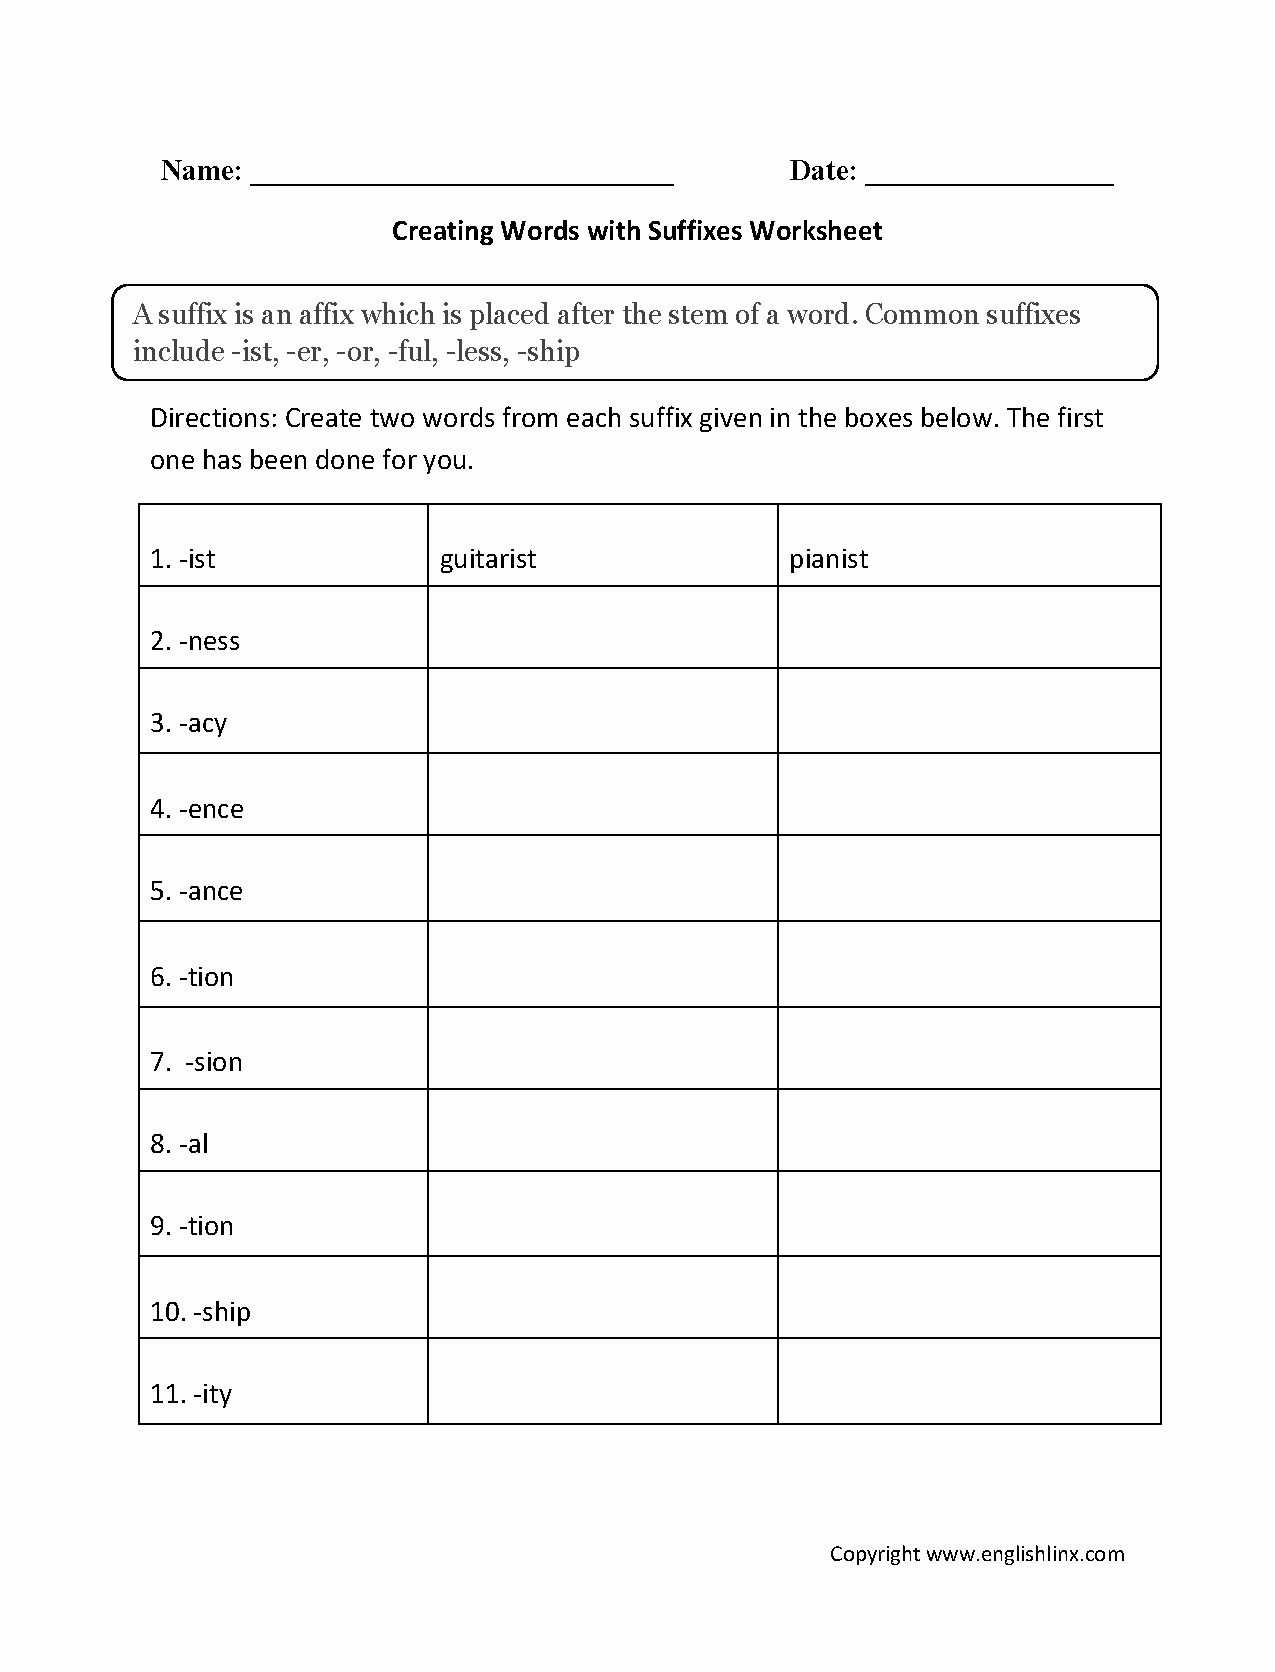 Suffix Worksheets 4th Grade Inspirational Creating Words with Suffixes Worksheets